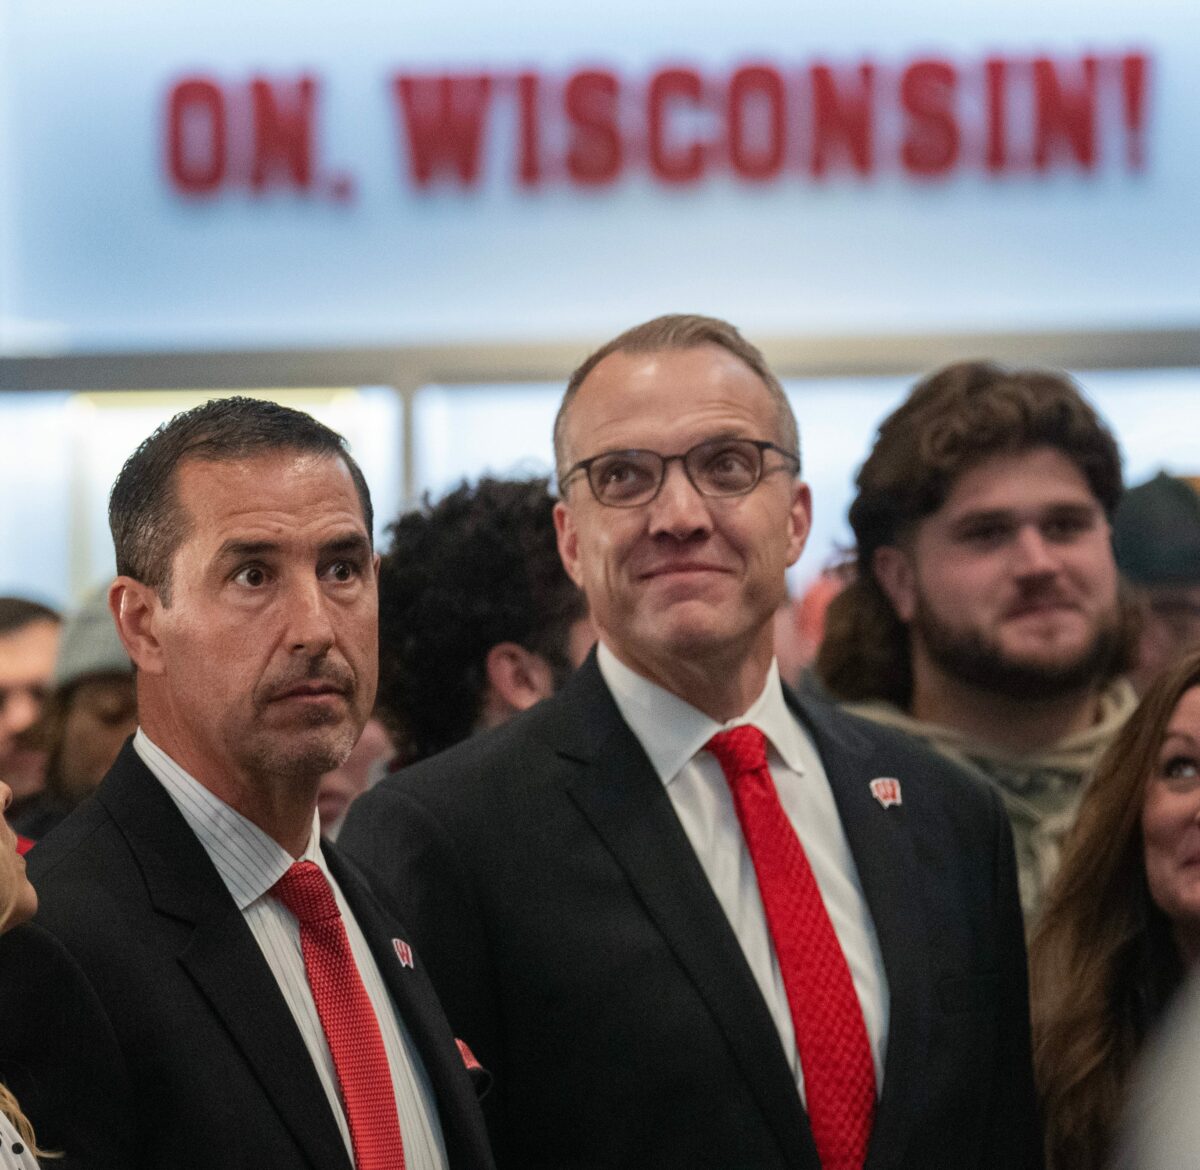 Wisconsin season ticket prices are going up for the first time in six years